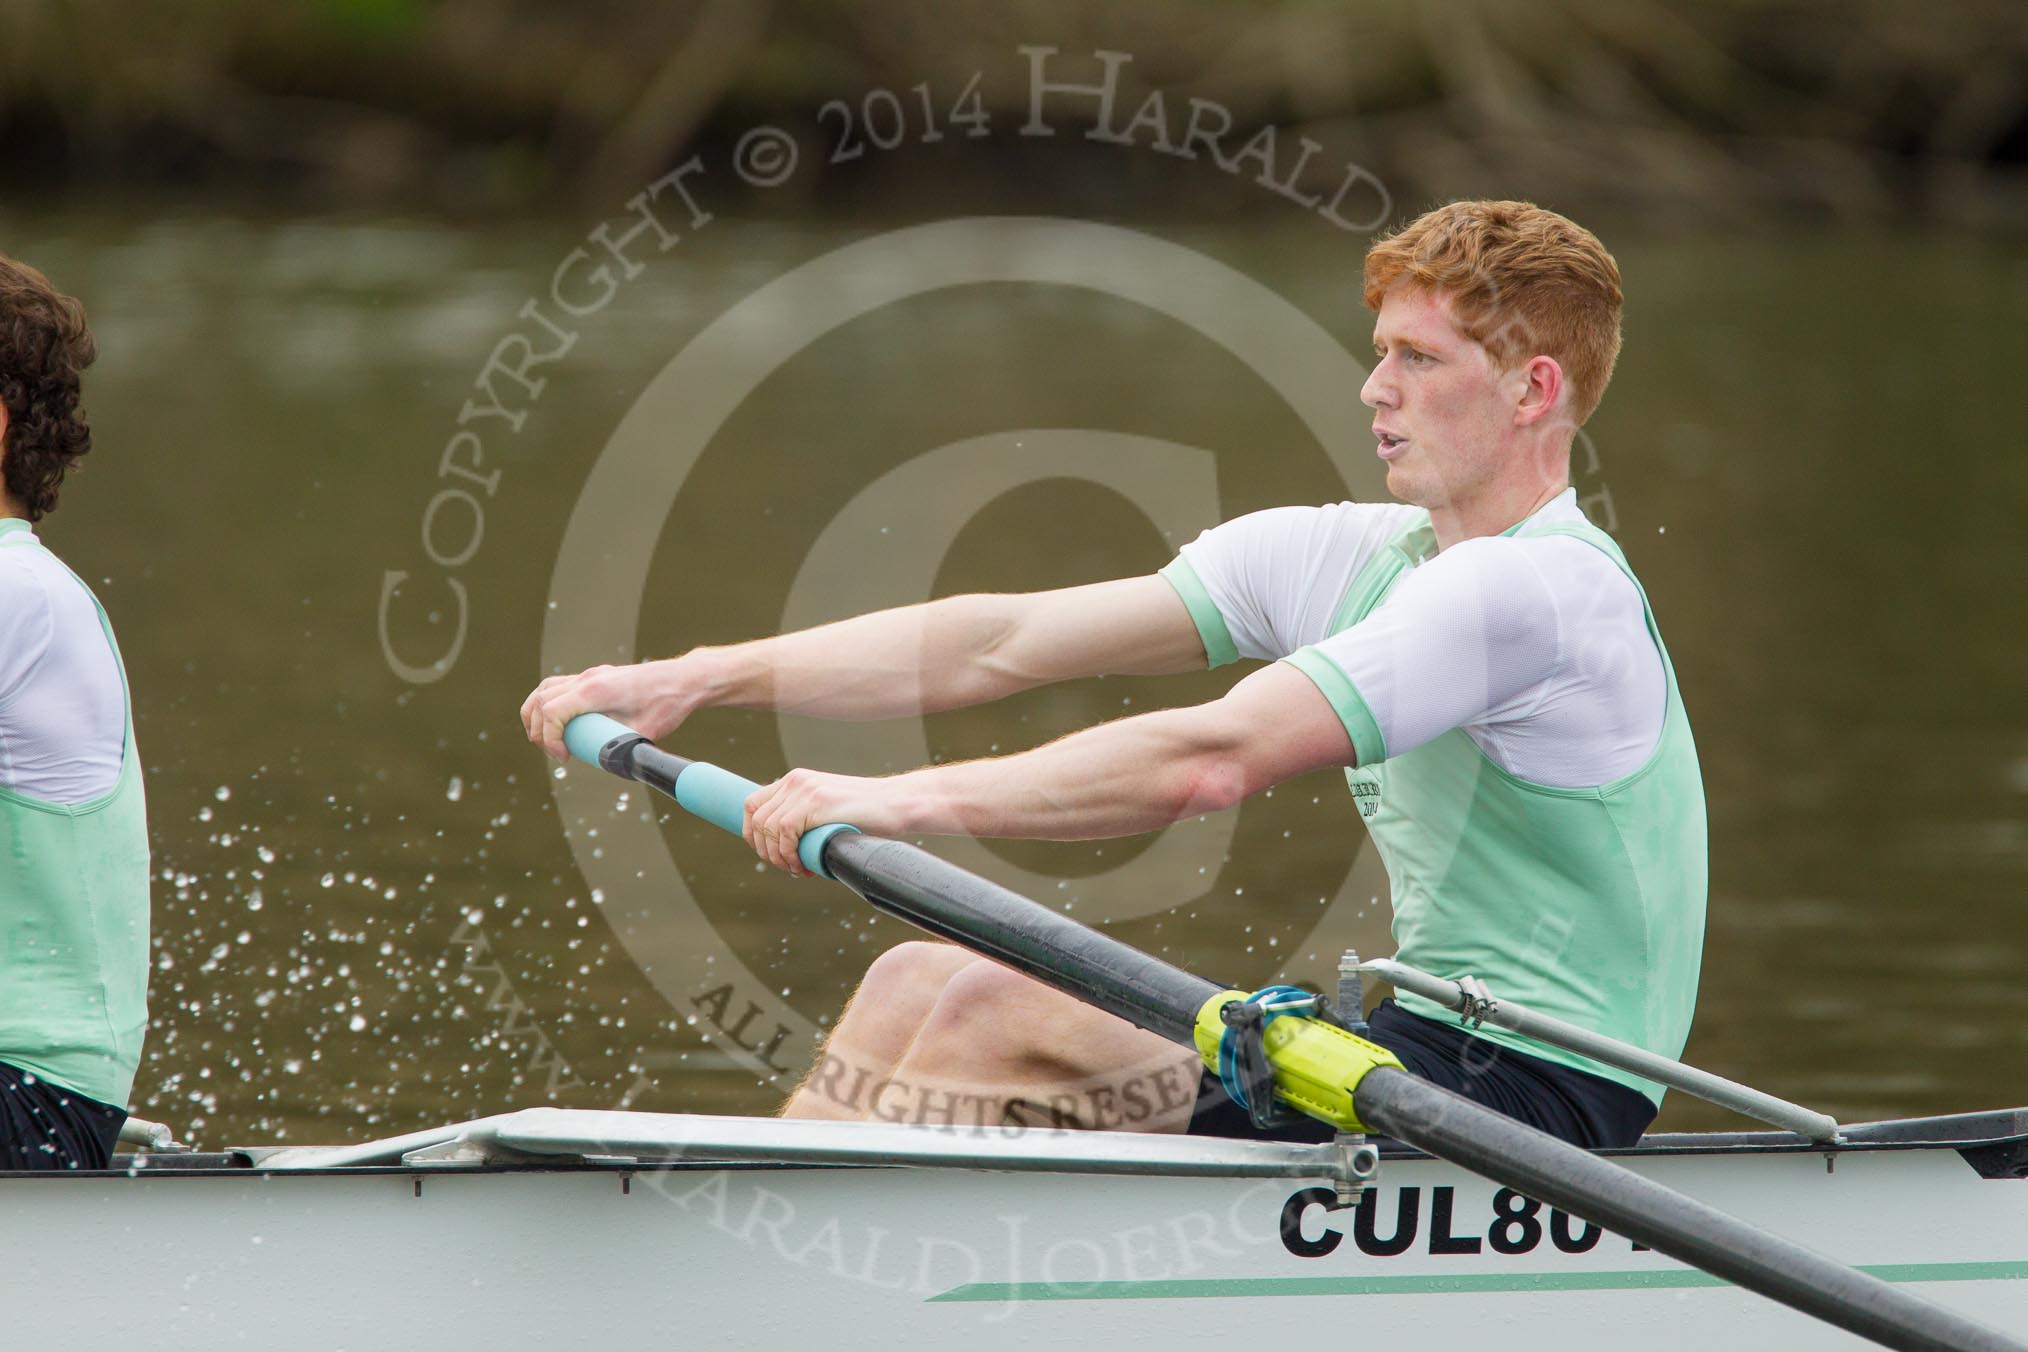 The Women's Boat Race and Henley Boat Races 2014: The Lightweight Men's Boat Race - OULRC vs CULRC. In the leading Cambridge boat at bow Greg Street..
River Thames,
Henley-on-Thames,
Buckinghamshire,
United Kingdom,
on 30 March 2014 at 15:40, image #379